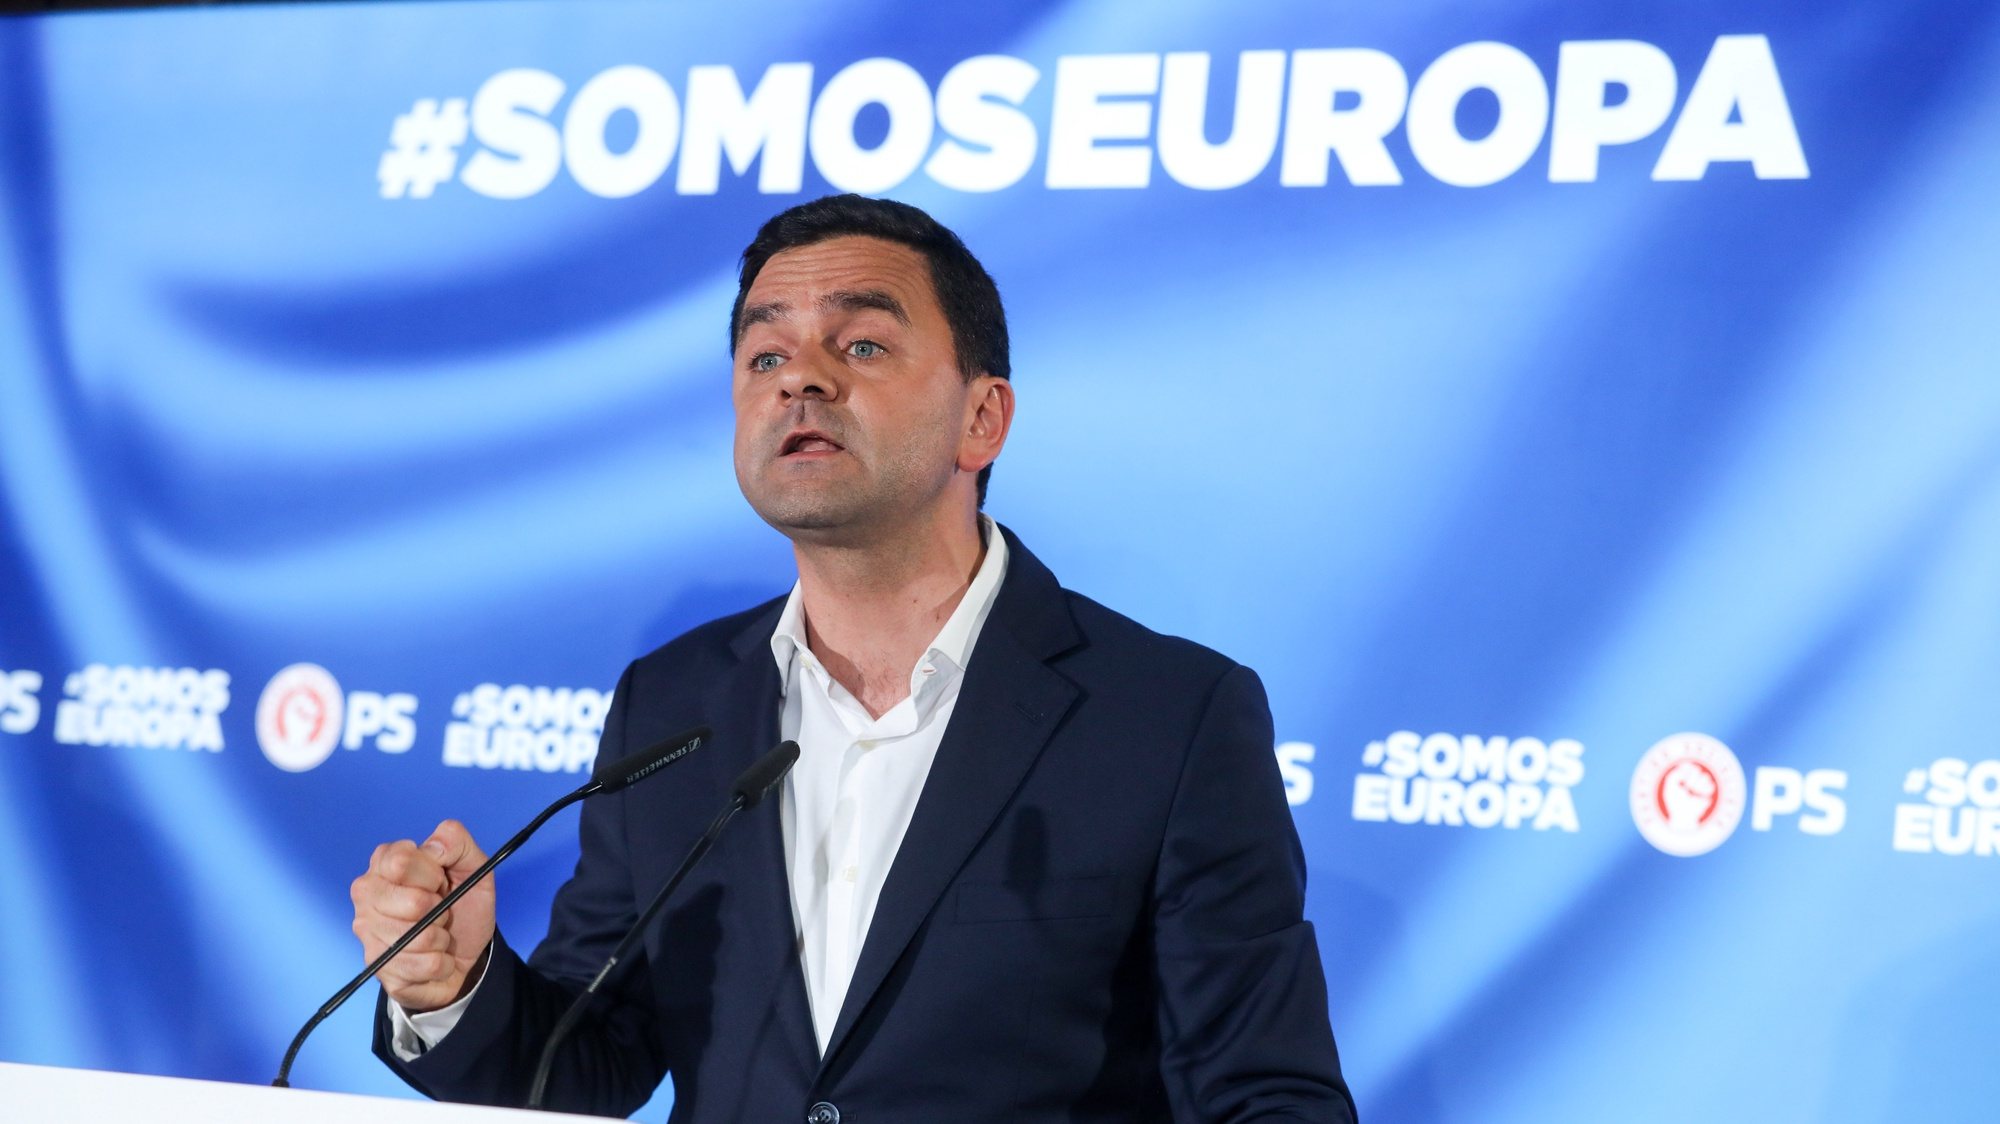 epa07604492 Lead Socialist Party candidate for the European Elections Pedro Marques (R) attend a press conference regarding the results in European Parliament elections, in Lisbon, Portugal, 26 May 2019. The European Parliament election was held by member countries of the European Union (EU) from 23 to 26 May 2019.  EPA/MIGUEL A. LOPES